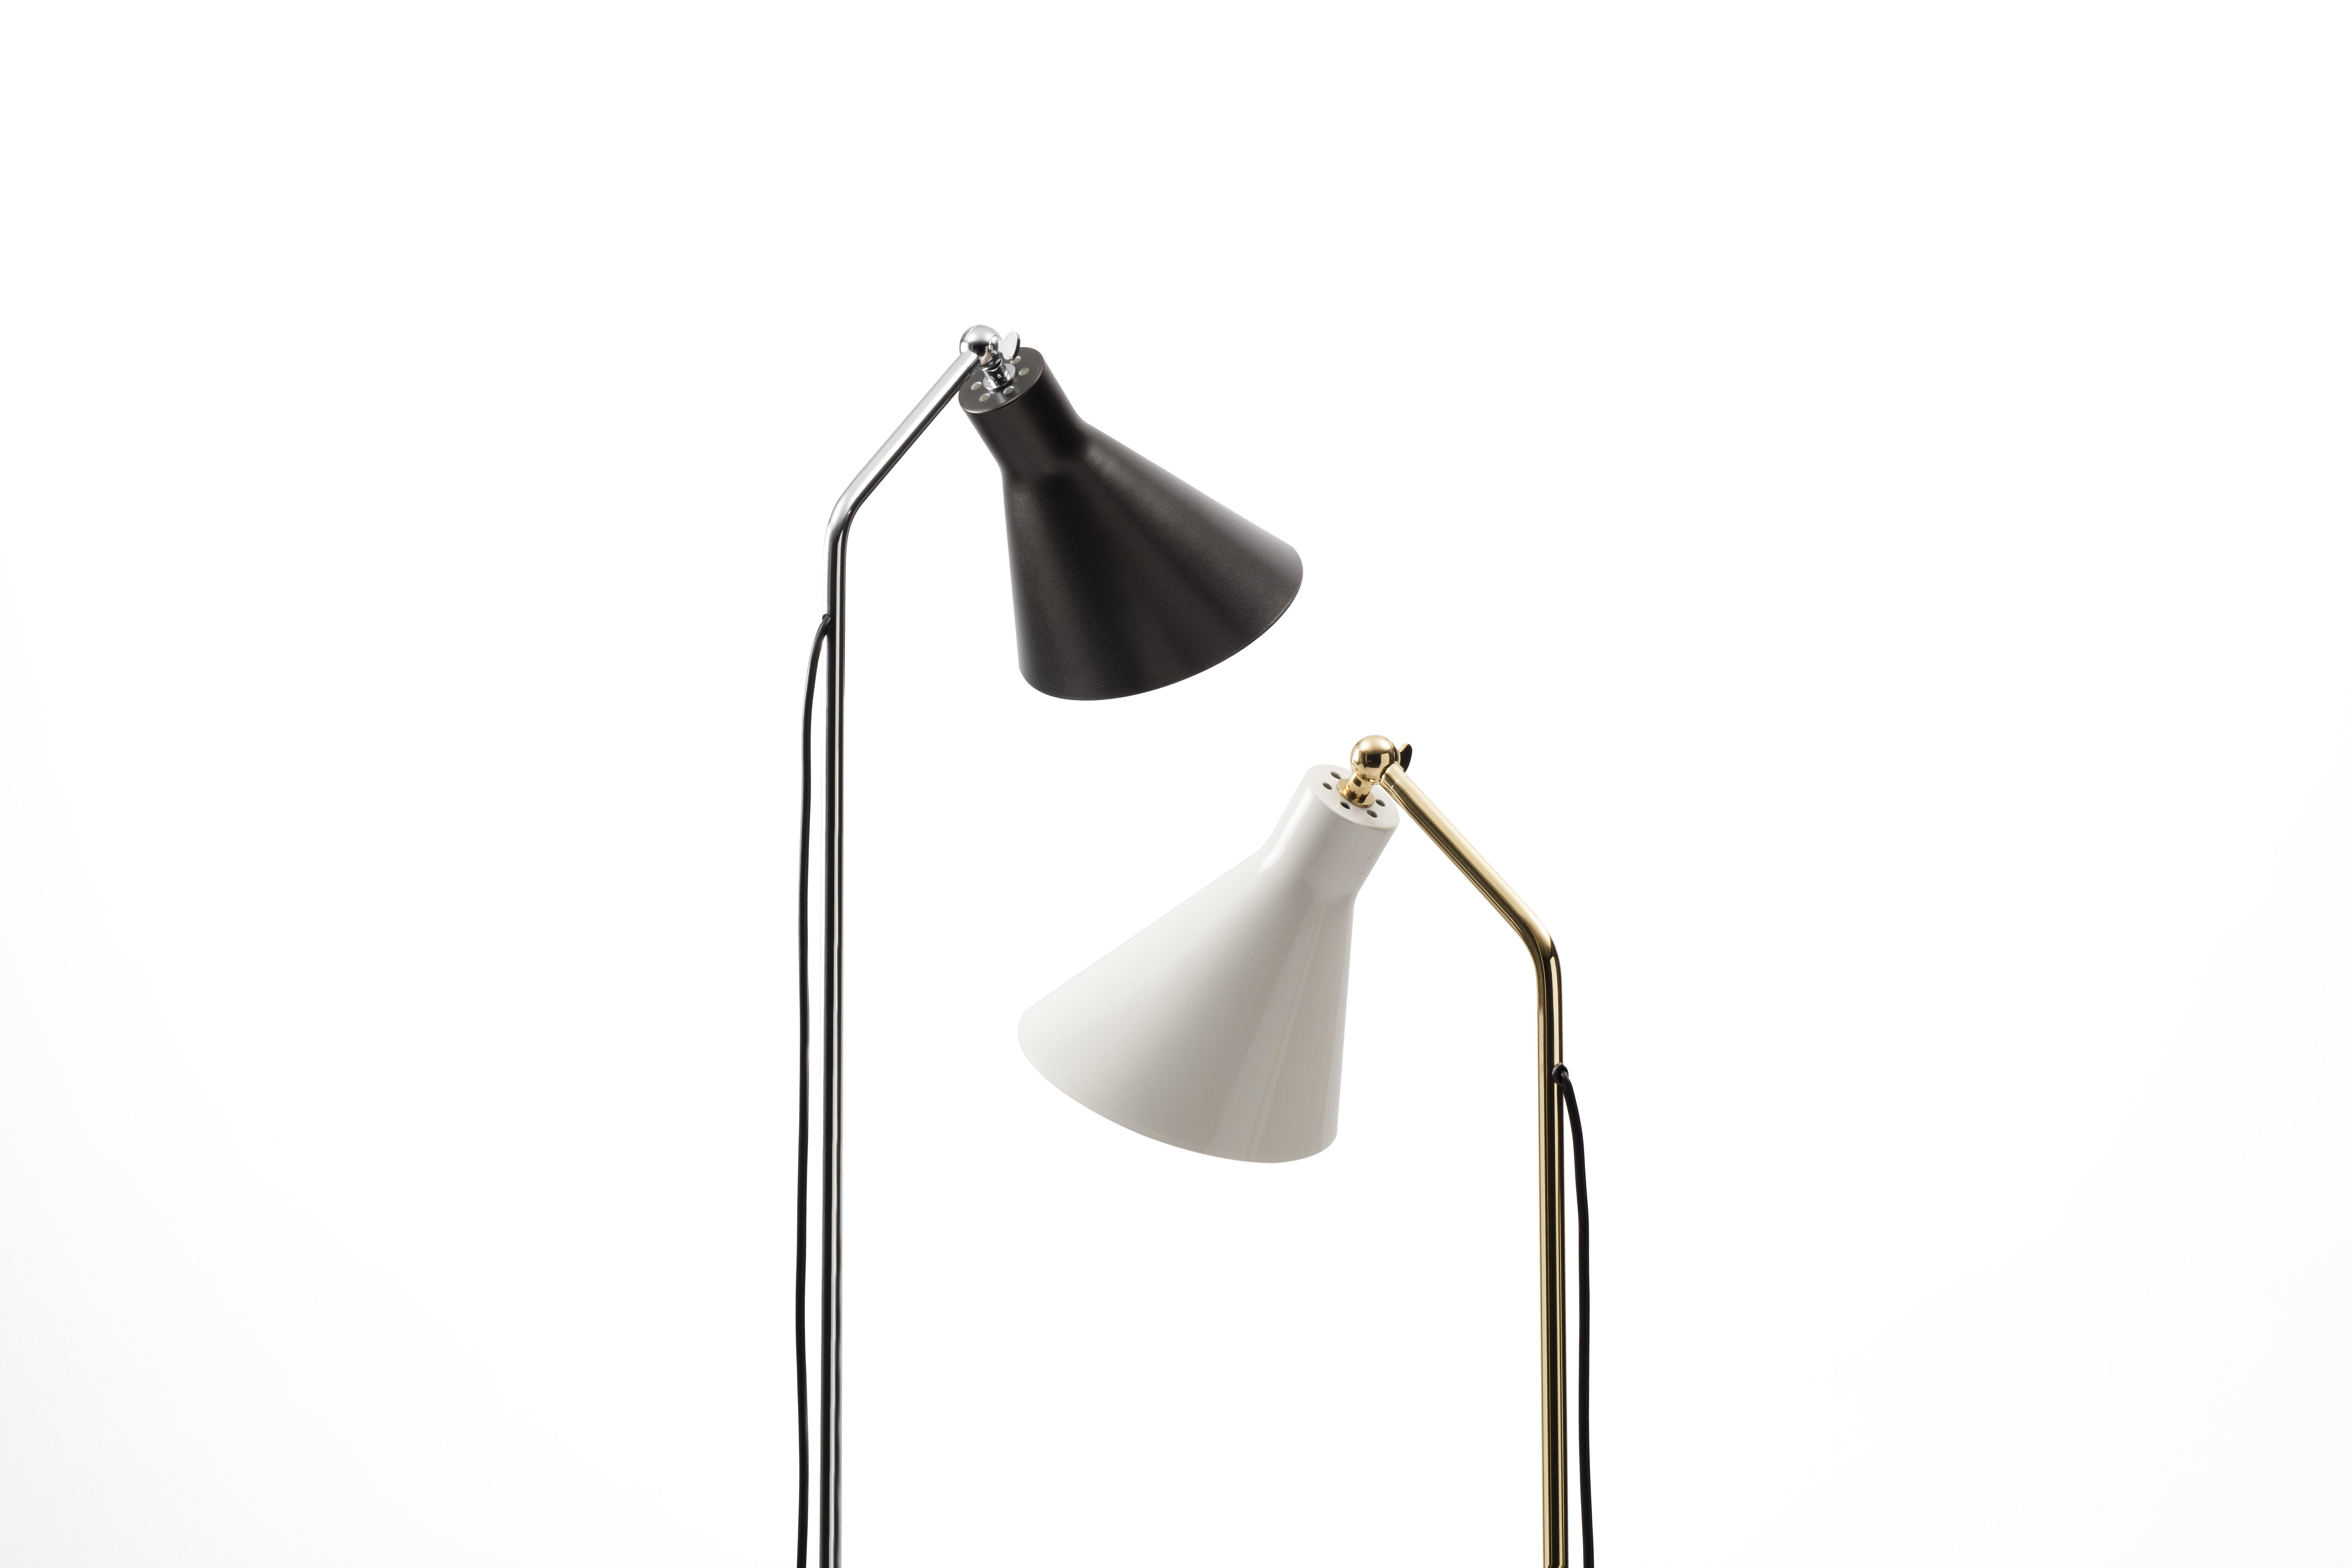 Ignazio Gardella Alzabile Floor Lamp in Brass, Metal and Marble for Tato Italia.

Executed in white Carrara marble, white painted metal and polished brass. Height and shade are adjustable as seen in the photos.

Price is per item. Available to order